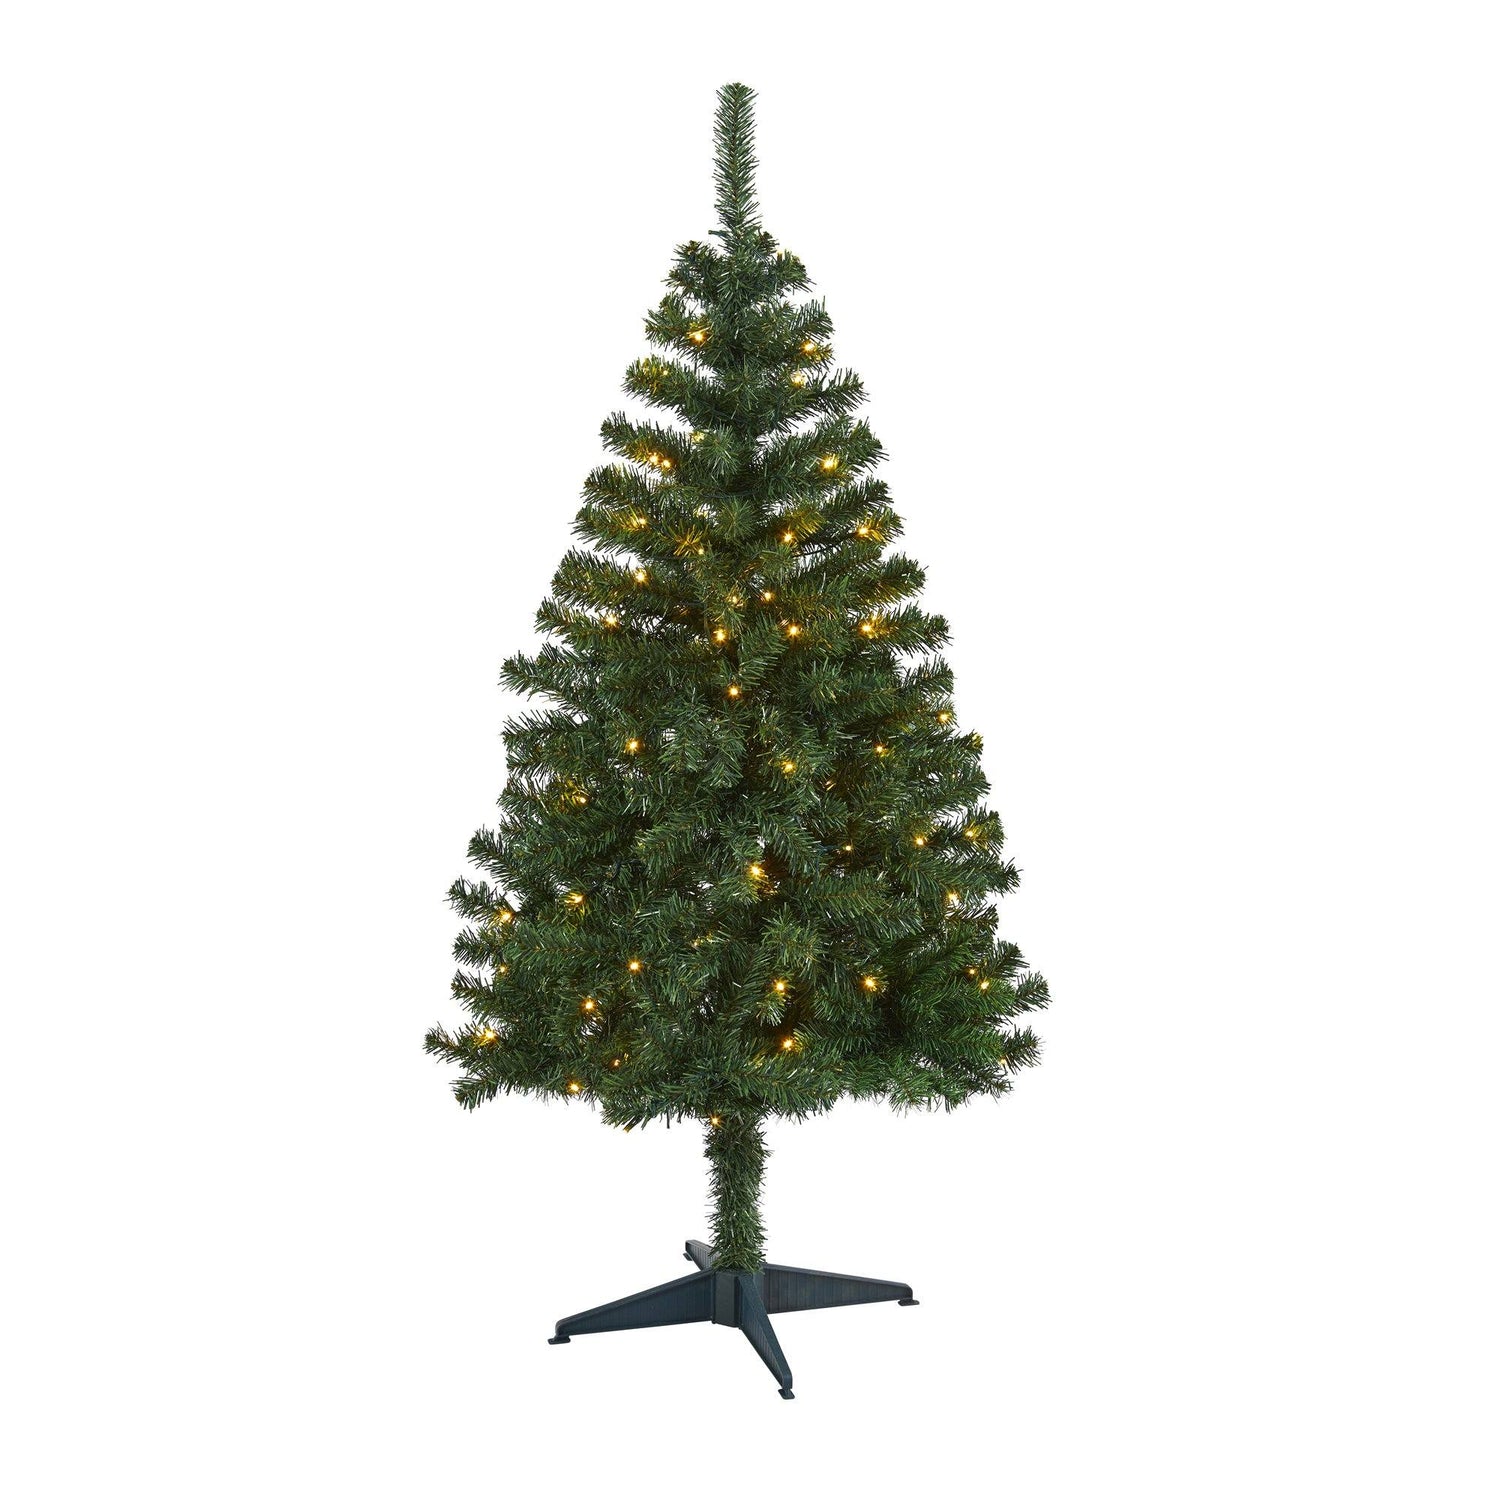 4' Northern Tip Pine Artificial Christmas Tree with 100 Clear LED Lights